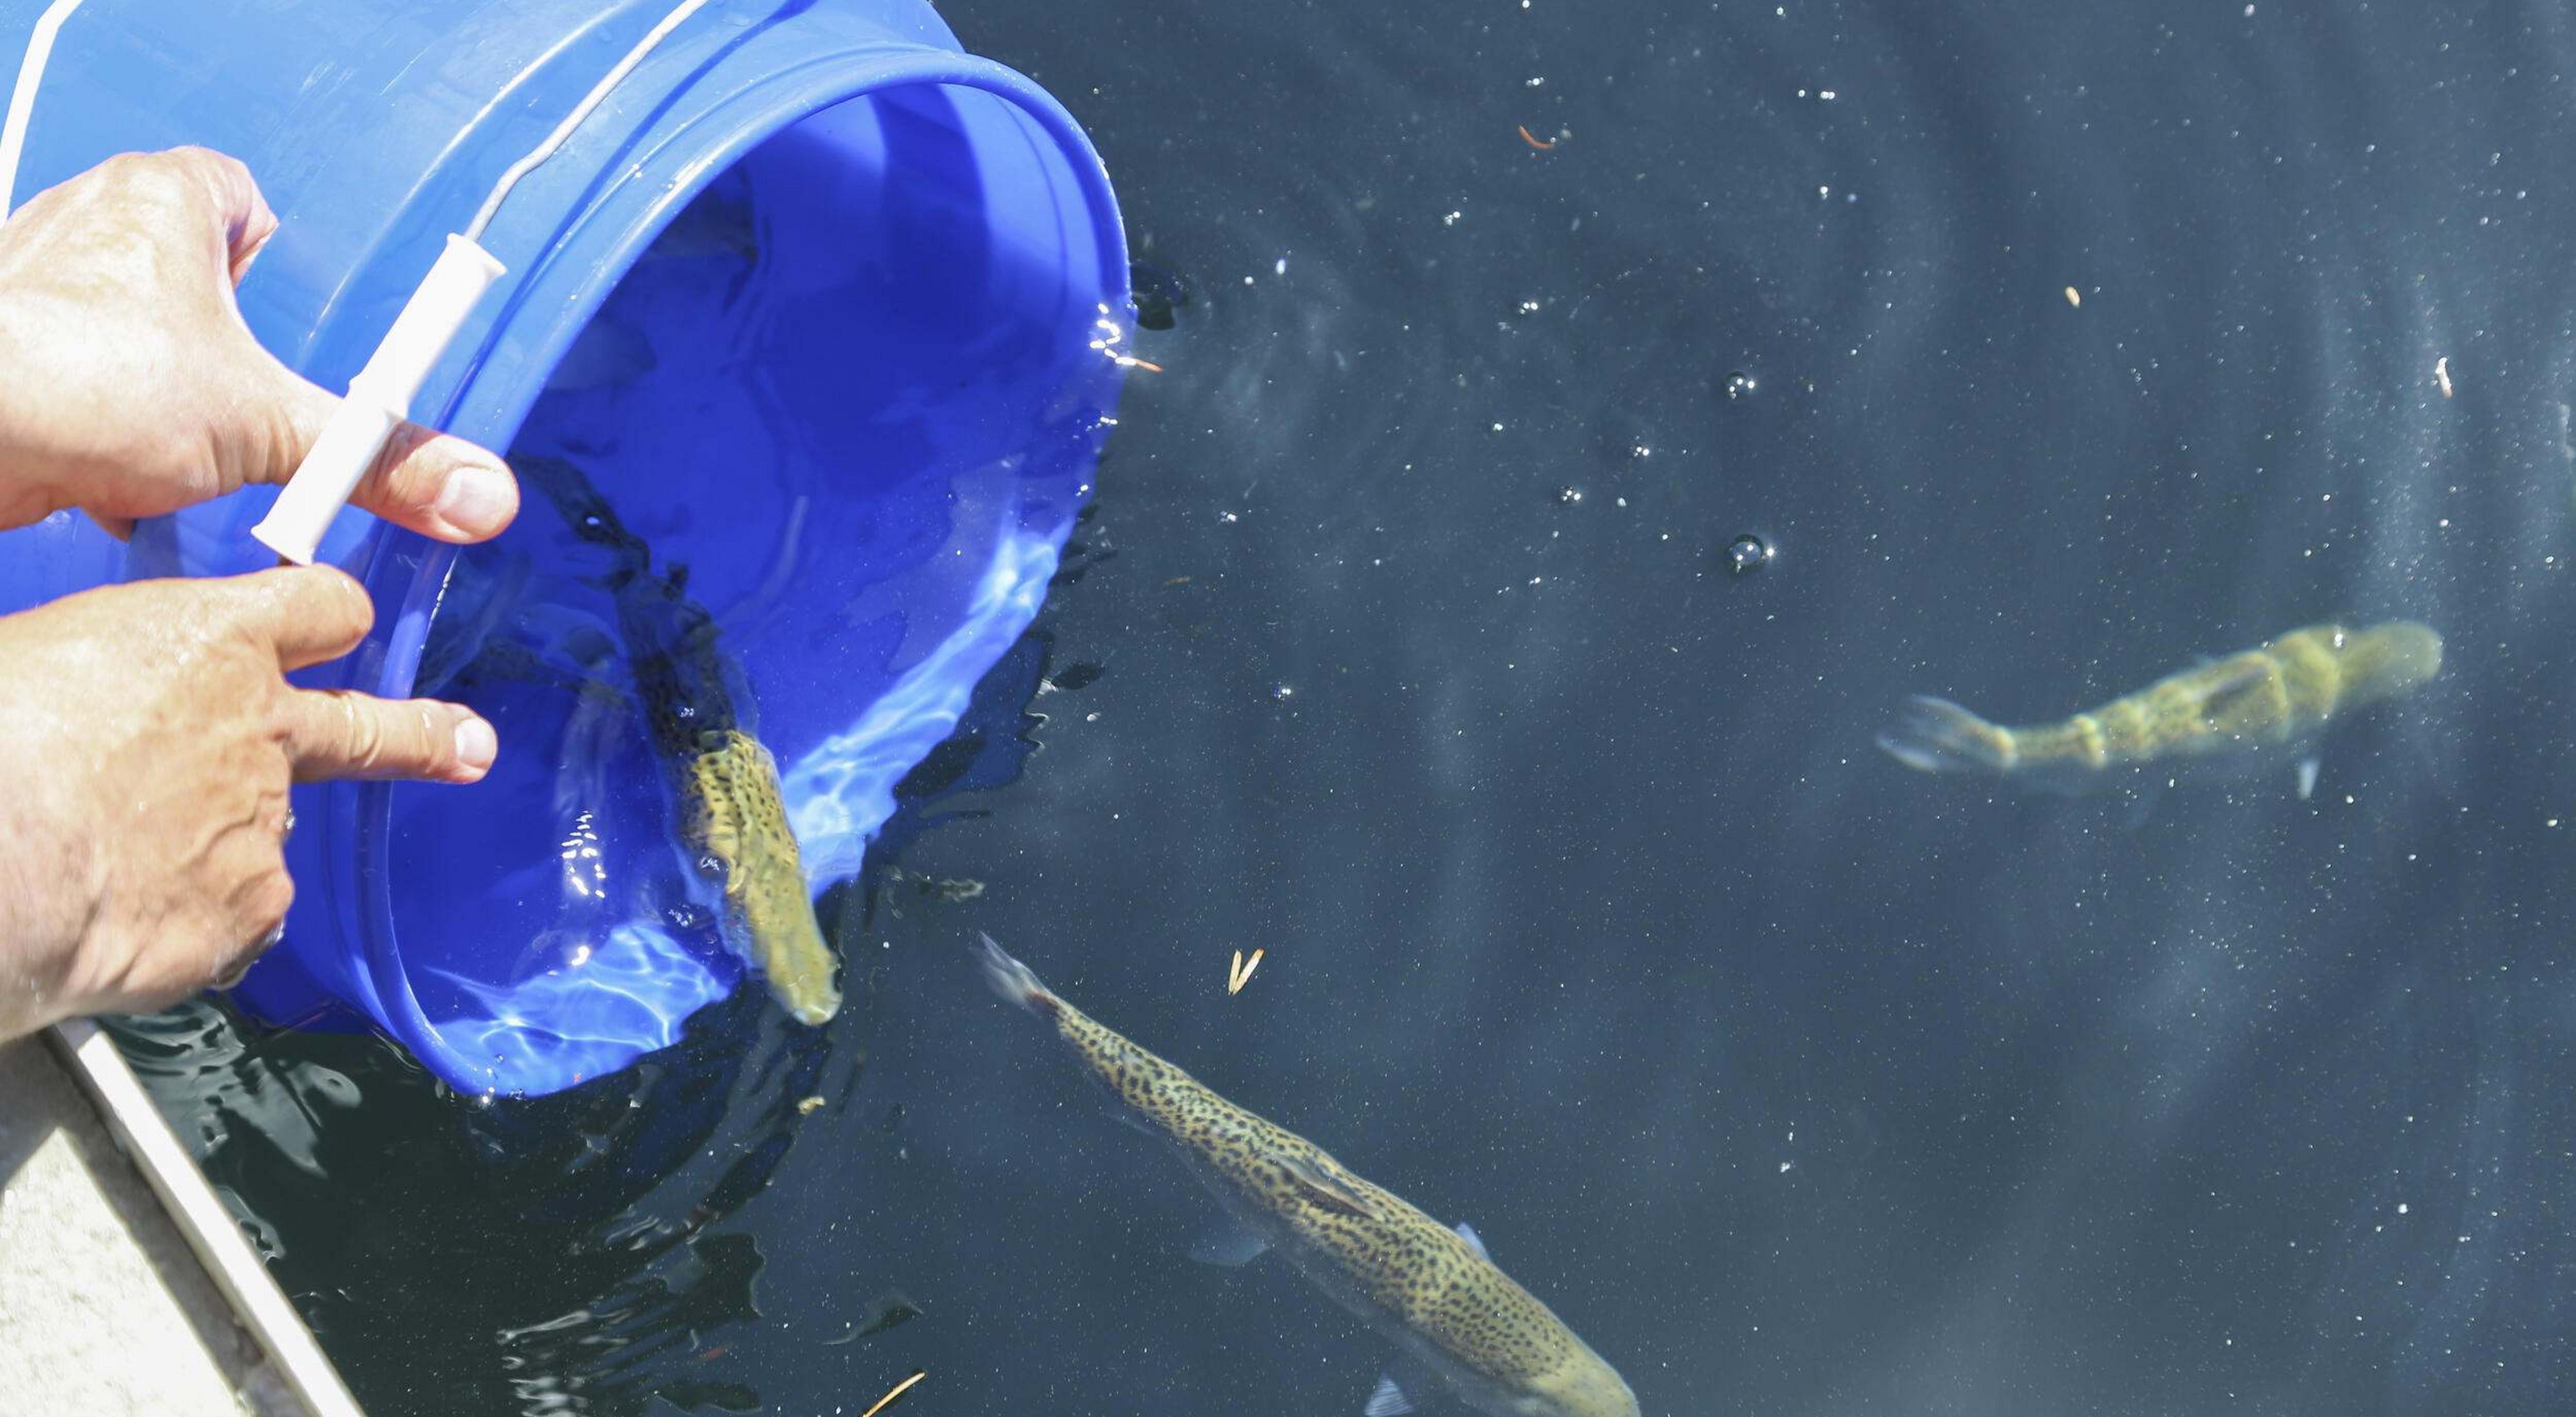 Hands place a blue bucket in water and release a few small fish into the water.